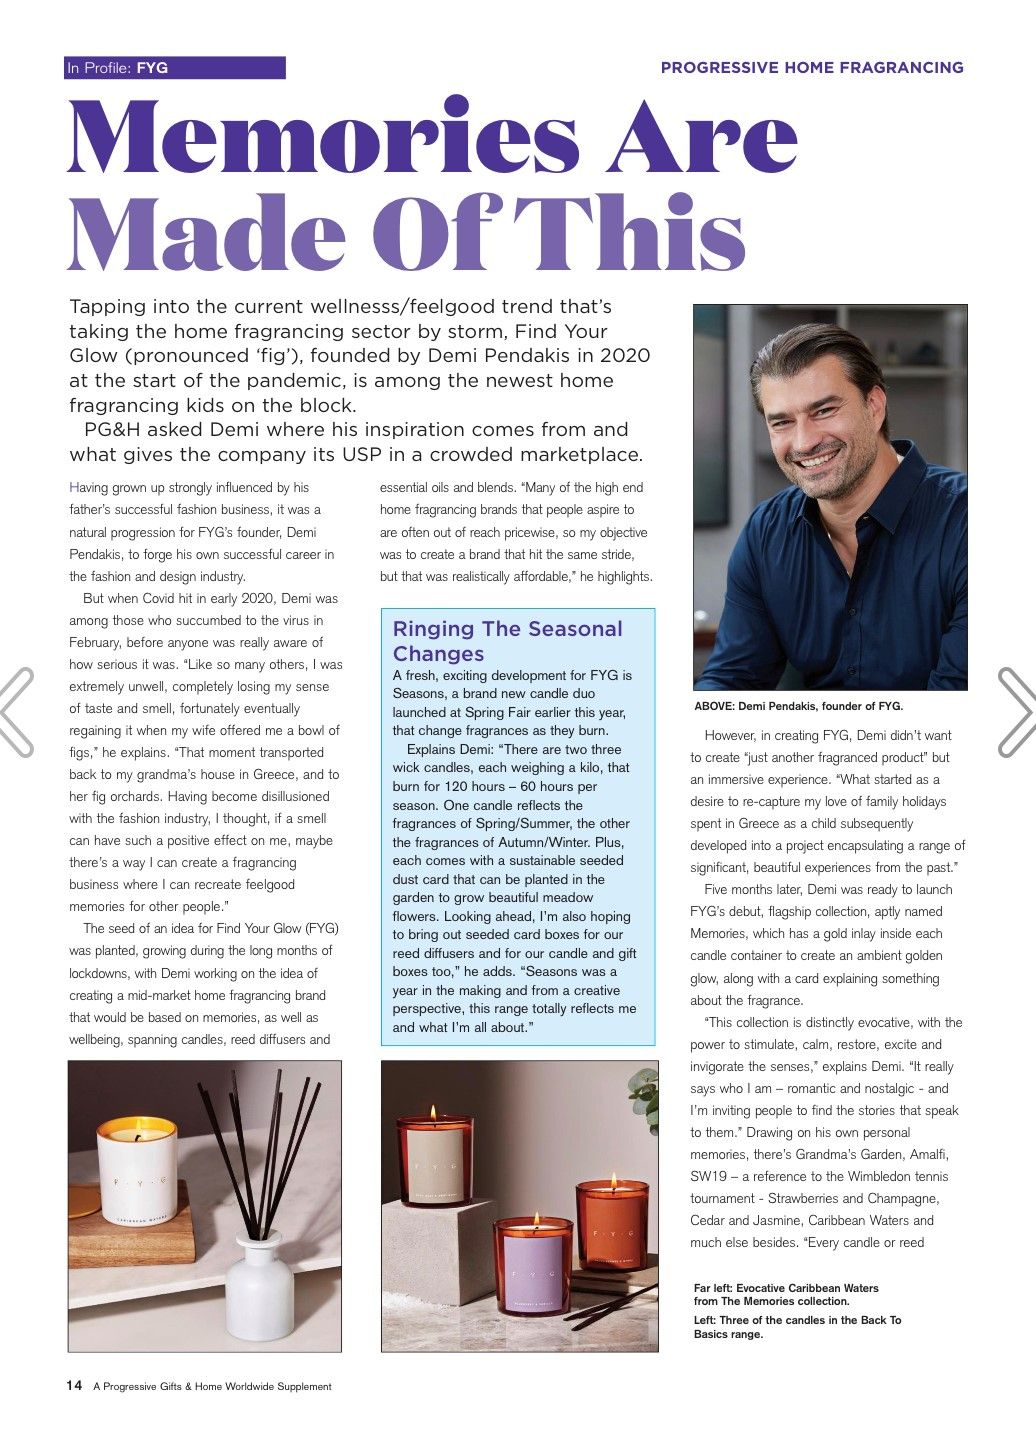 PROGRESSIVE GIFTS & HOME MAY PAGE 14